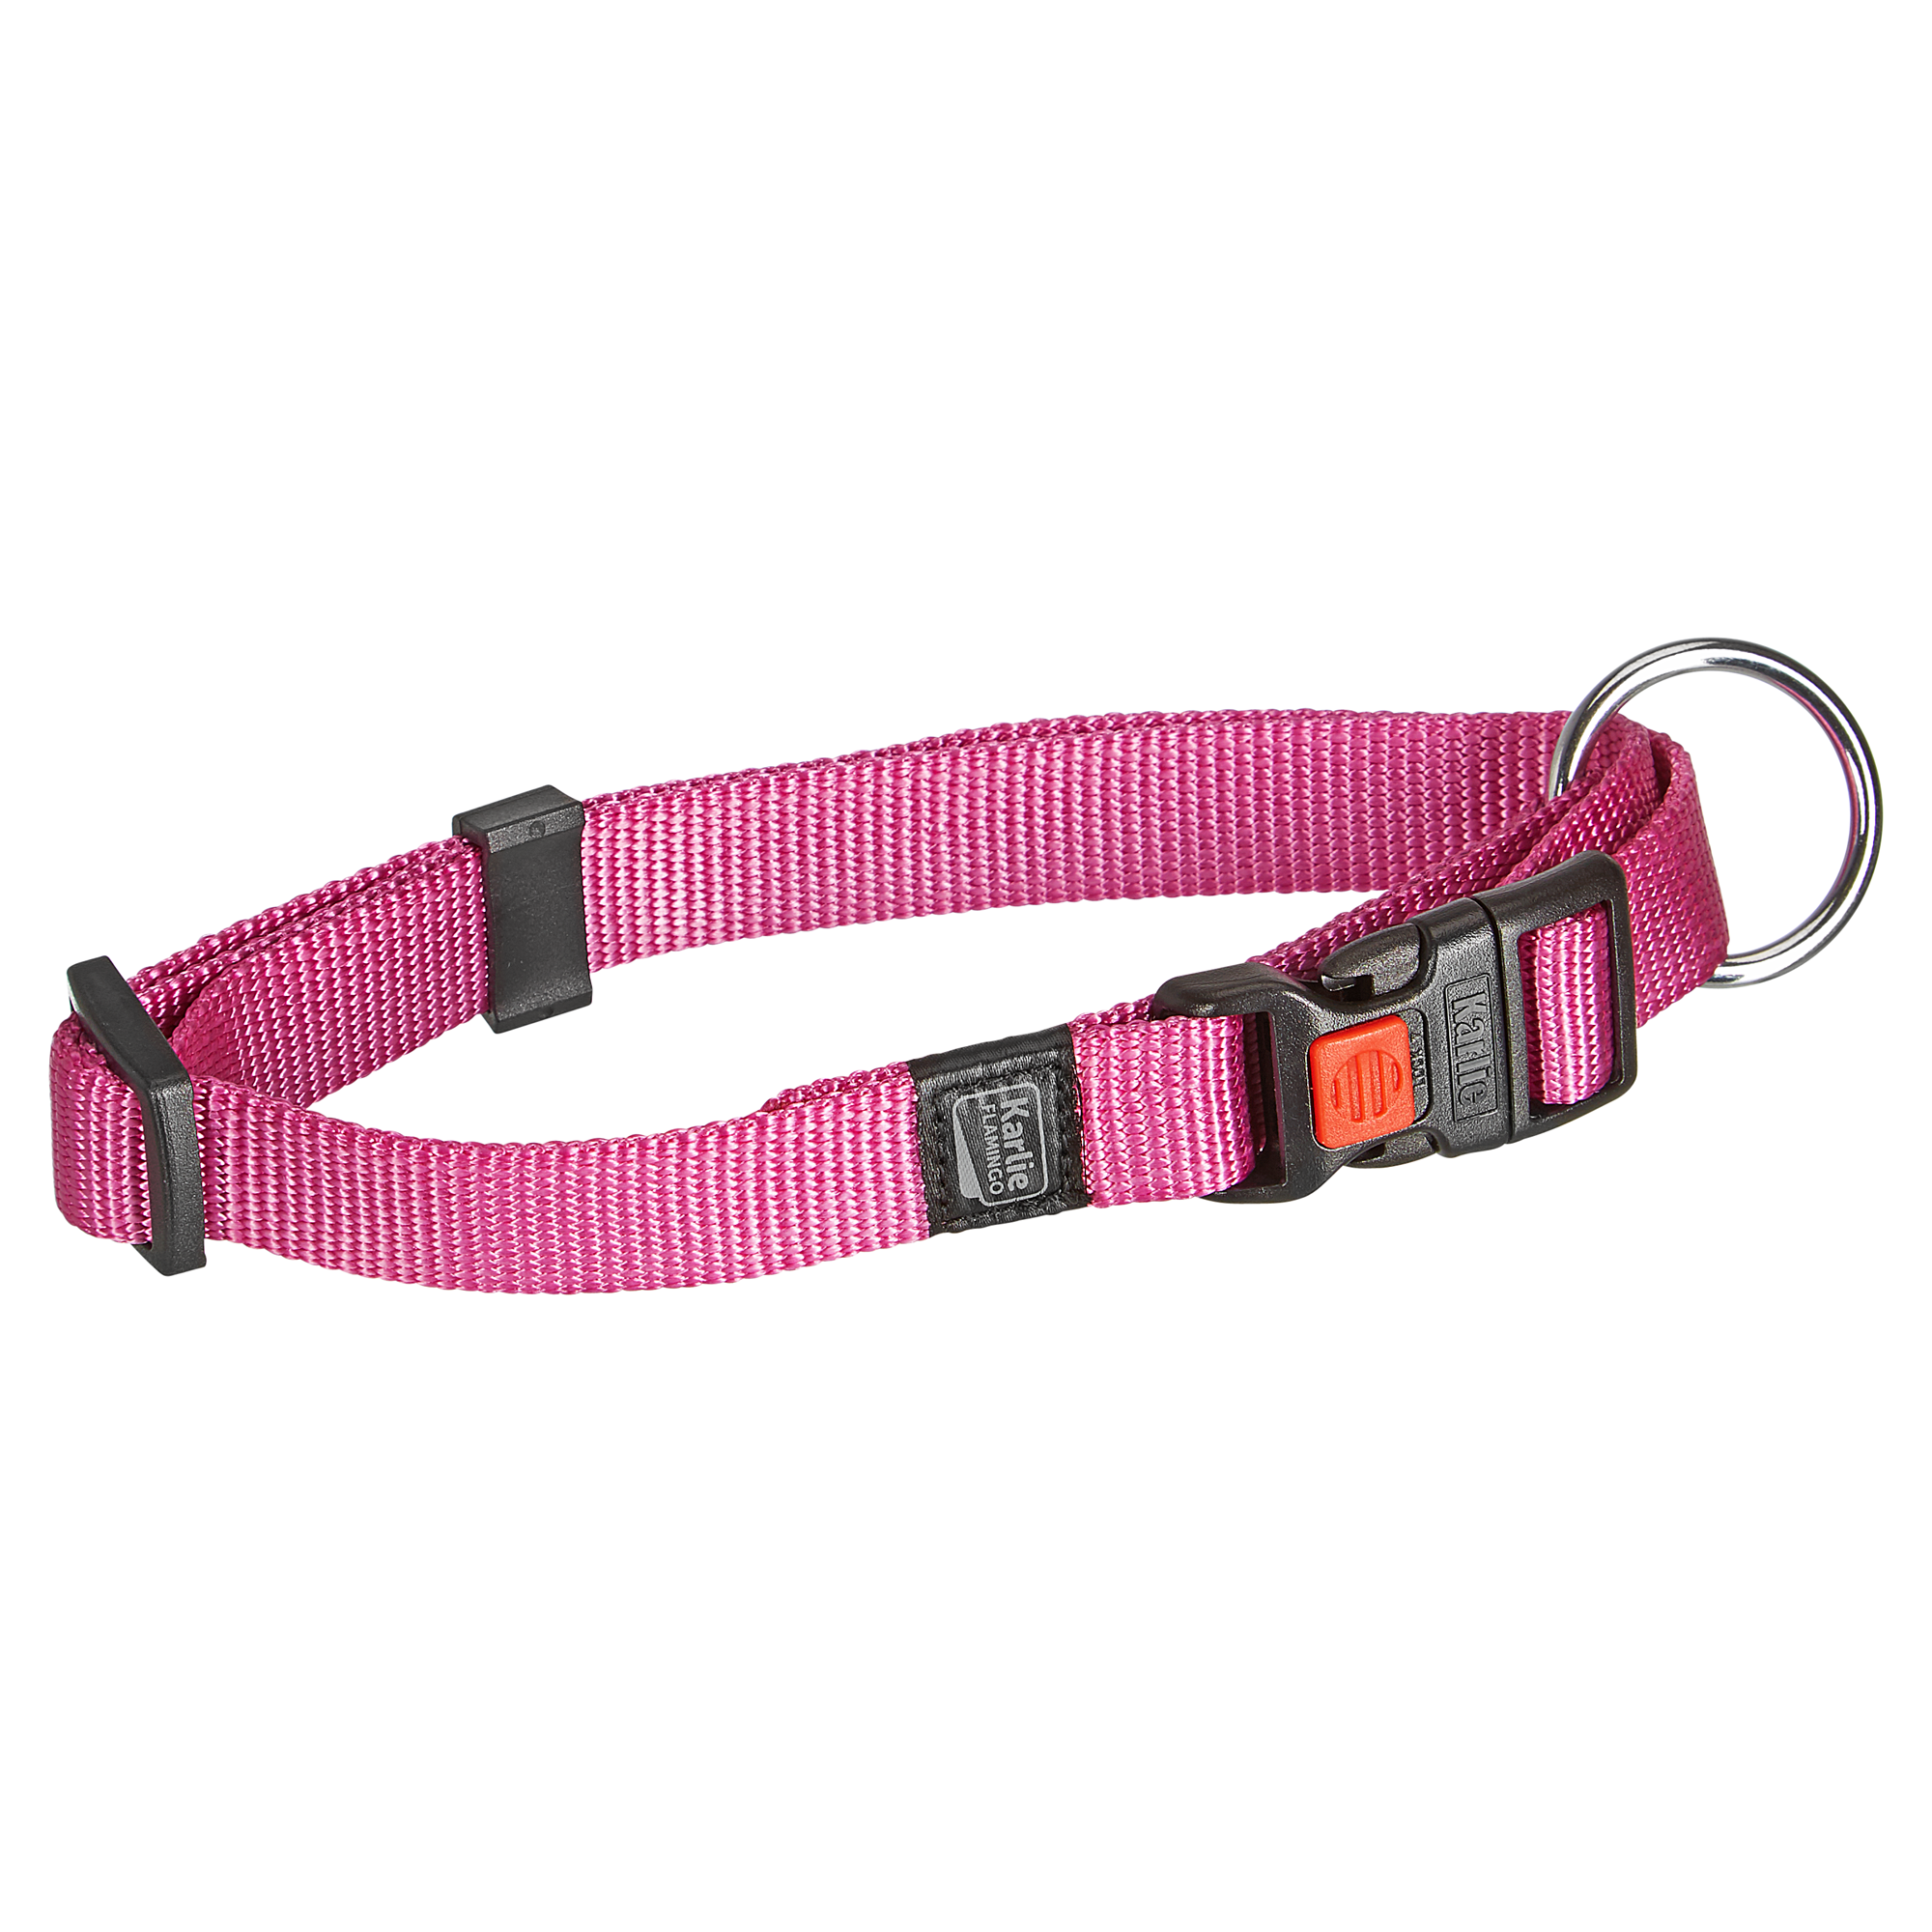 Hundehalsband "Art Sportiv Plus" rosa Gr. M + product picture